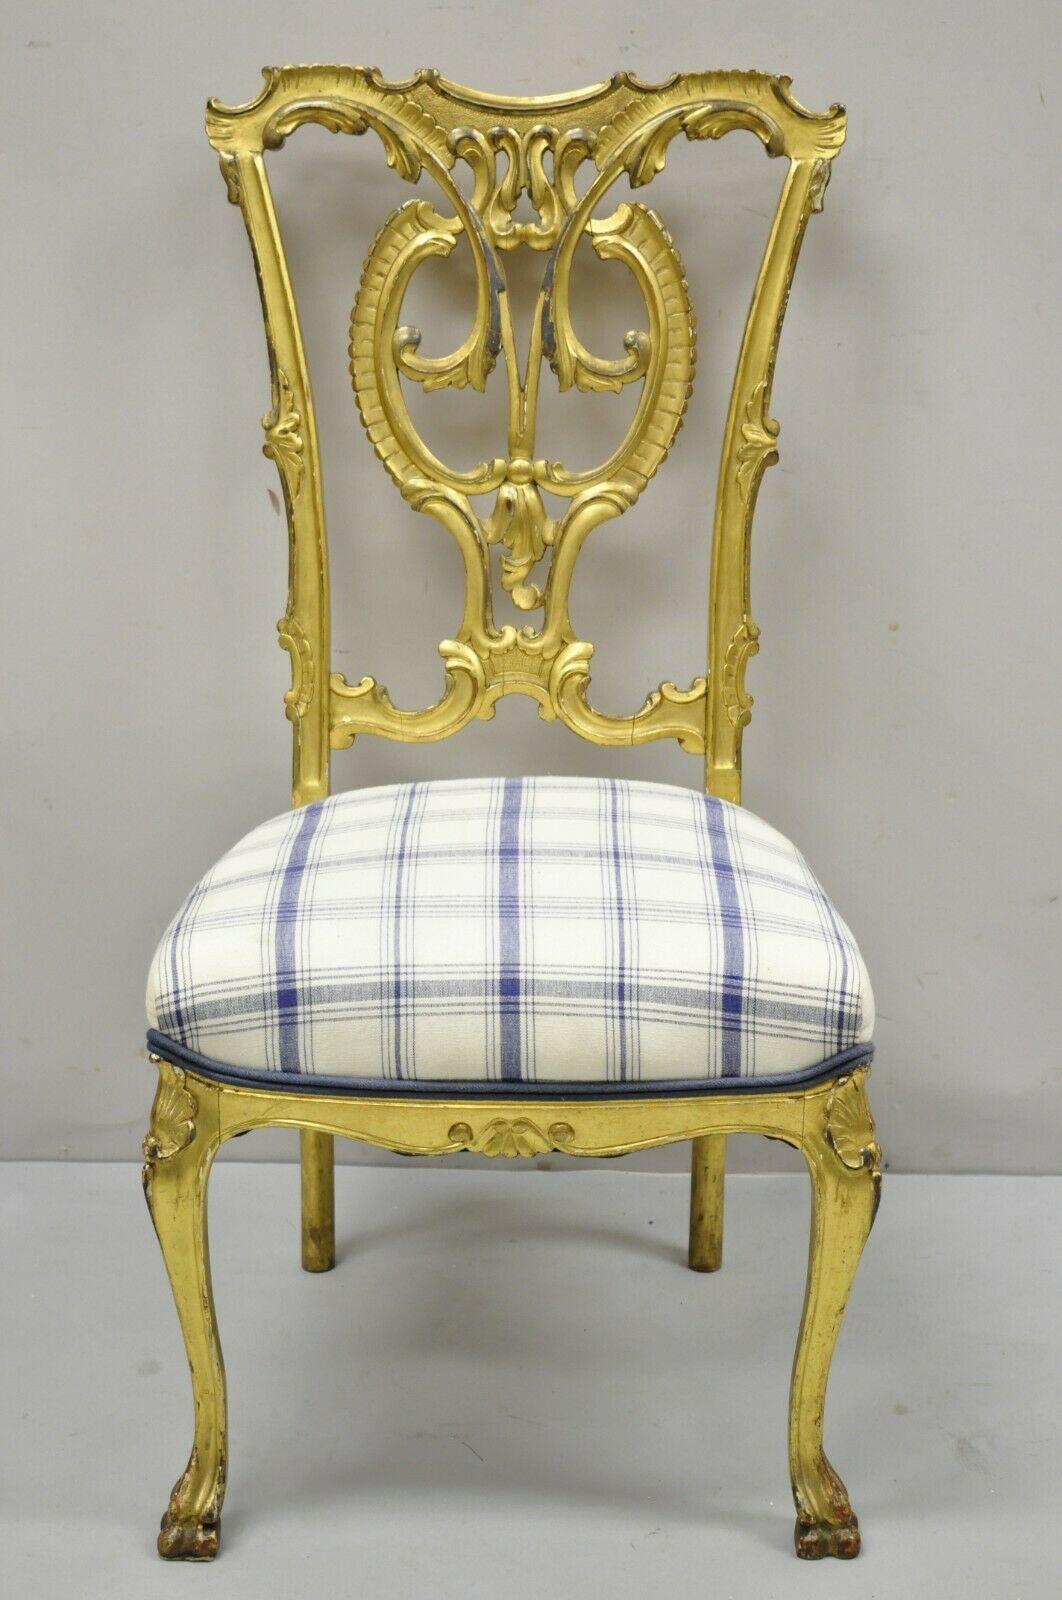 Antique Georgian Chippendale gold giltwood carved paw feet accent side chair. Item features a distressed gold gilt finish, solid wood frame, nicely carved details, carved paw feet, very nice antique item, quality craftsmanship, great style and form.